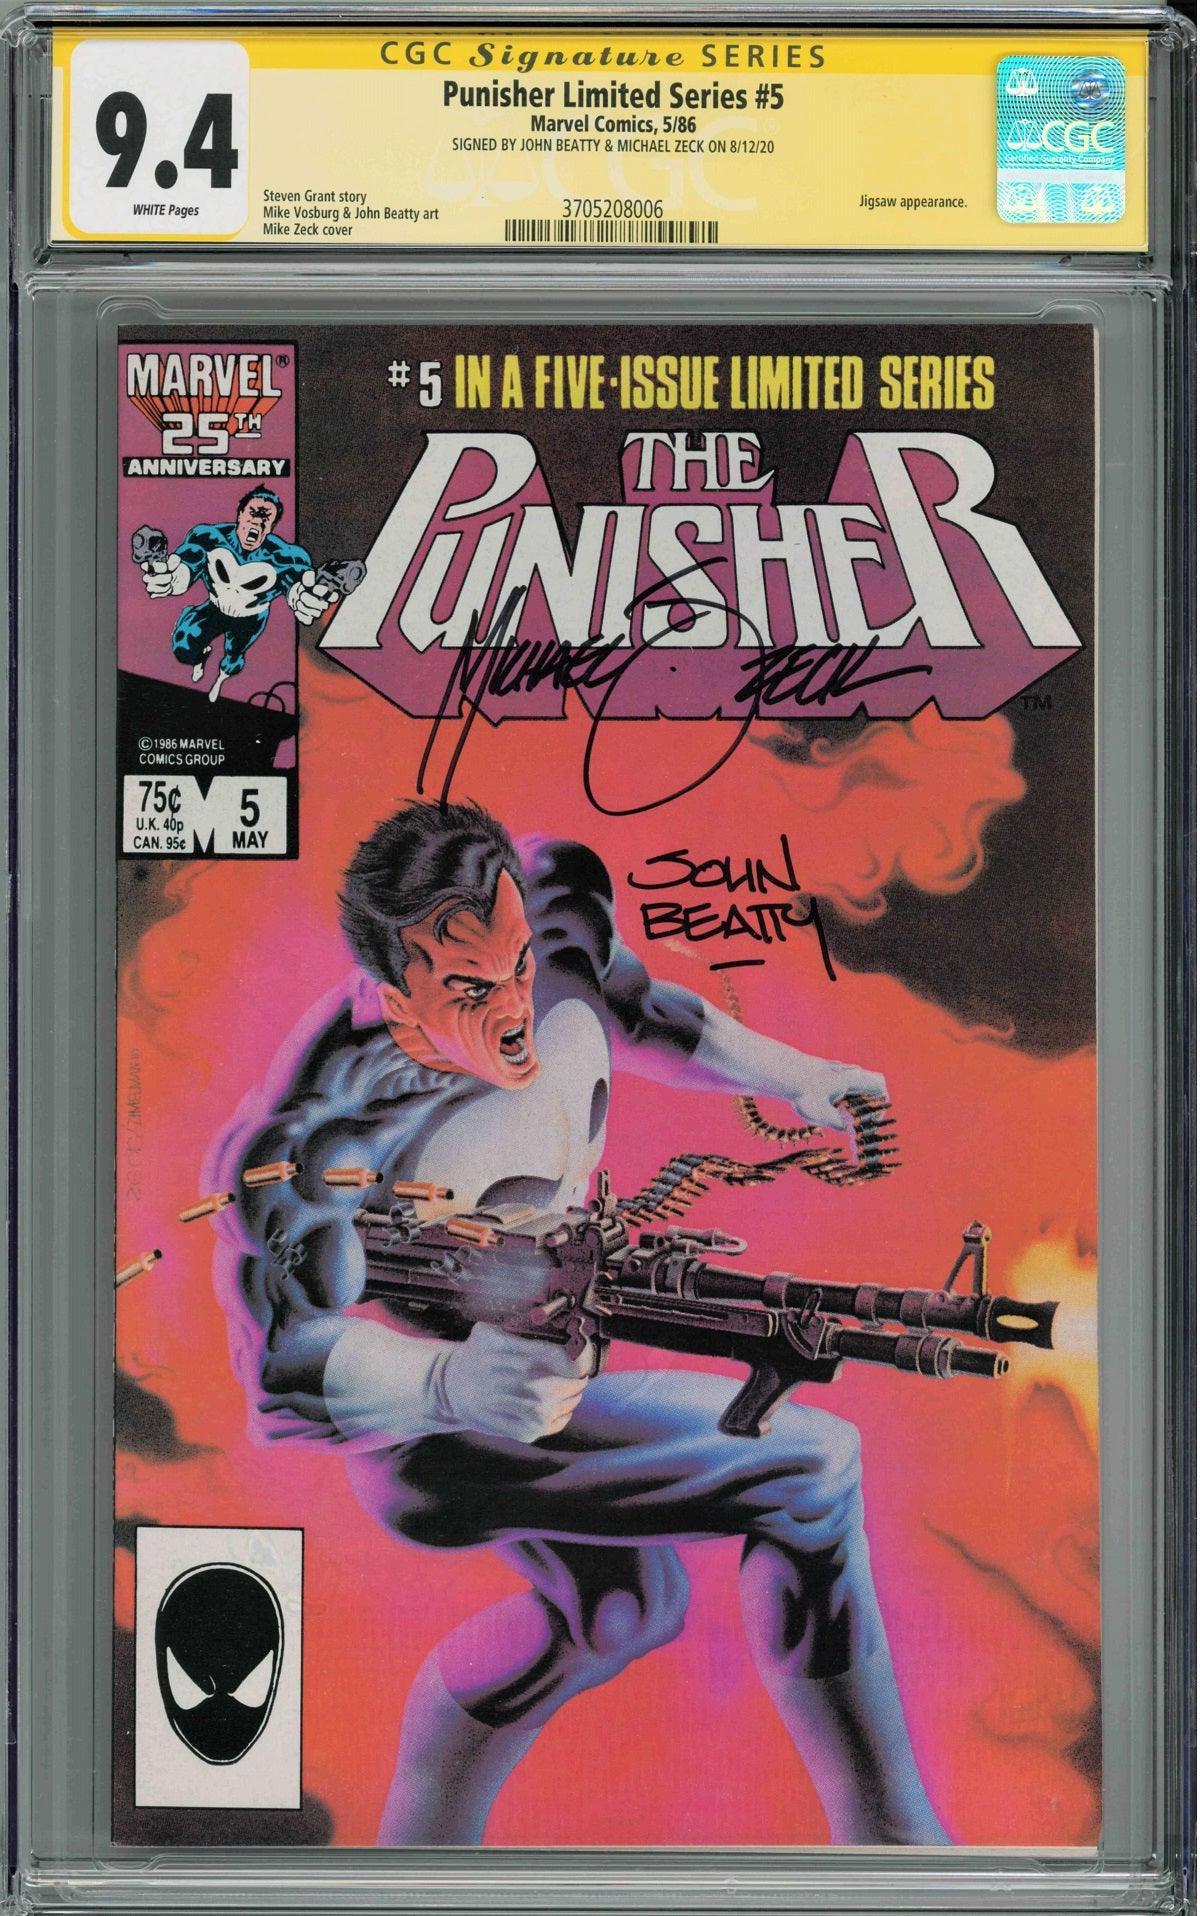 CGC PUNISHER LIMITED SERIES #5 (9.4) SIGNATURE SERIES - SIGNED BY JOHN BEATTY & MIKE ZECK - Kings Comics